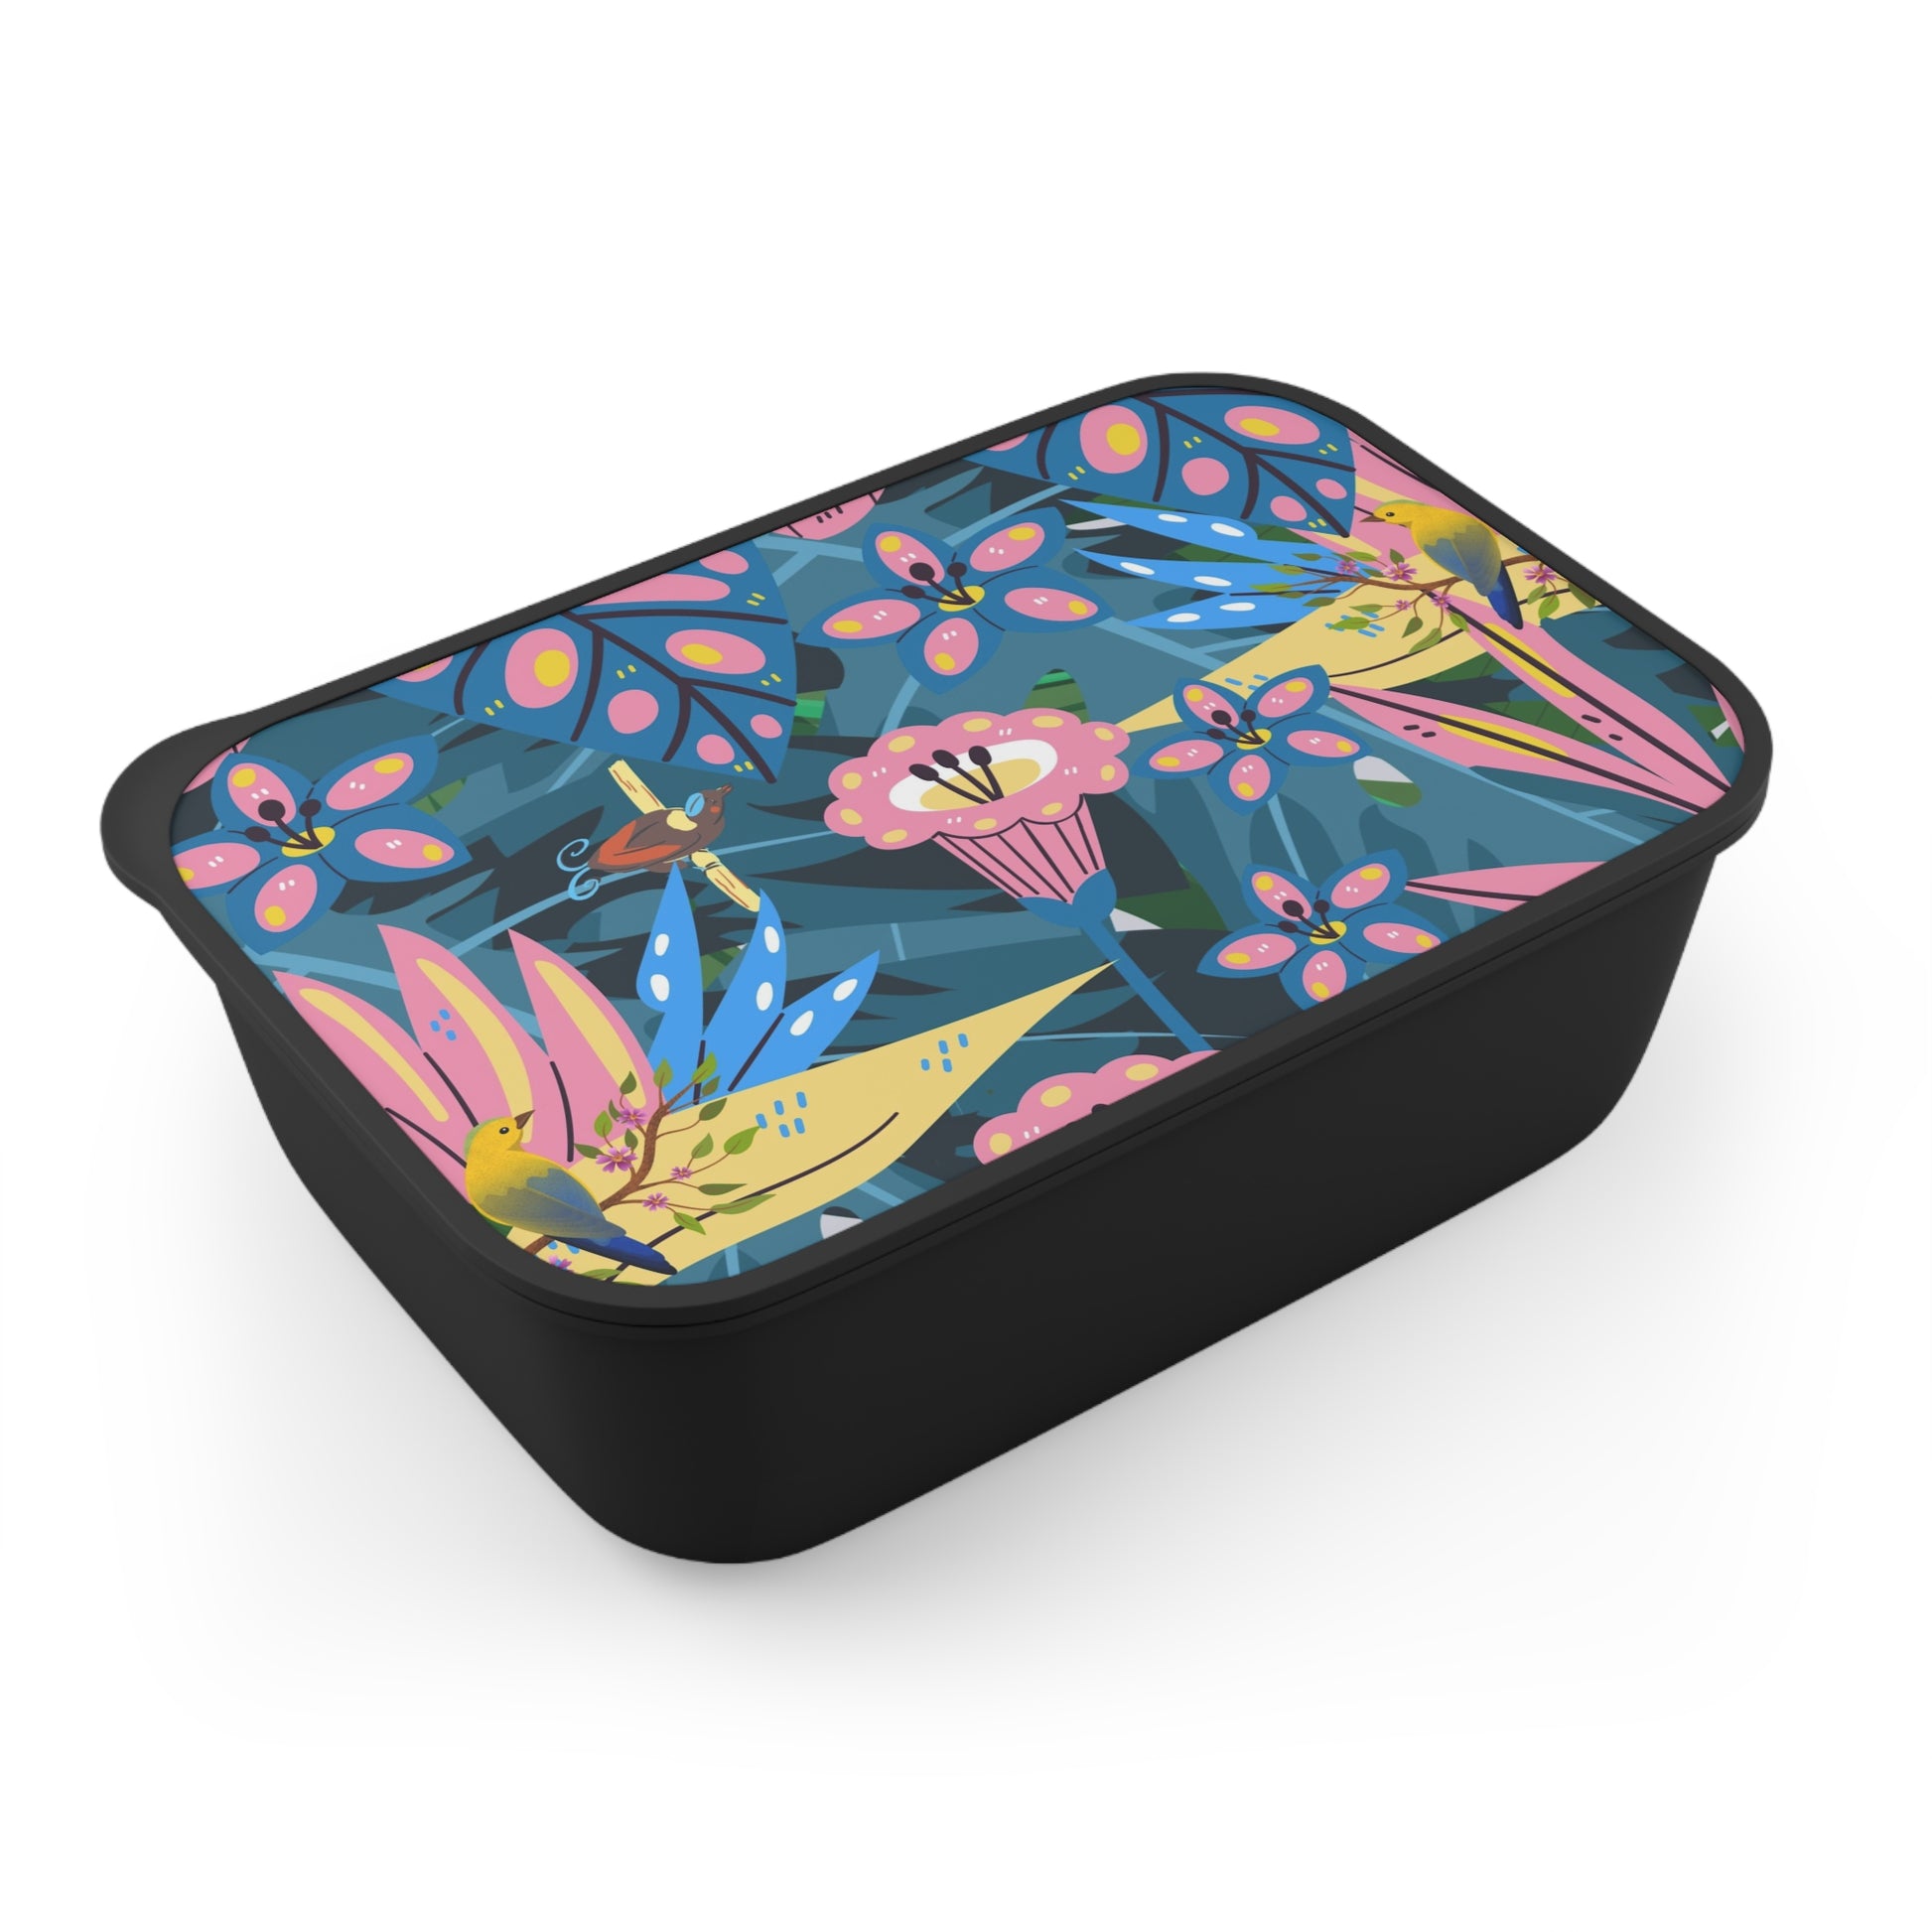 Boho Bento Box with Band and Utensils, Tropical Lunch Box